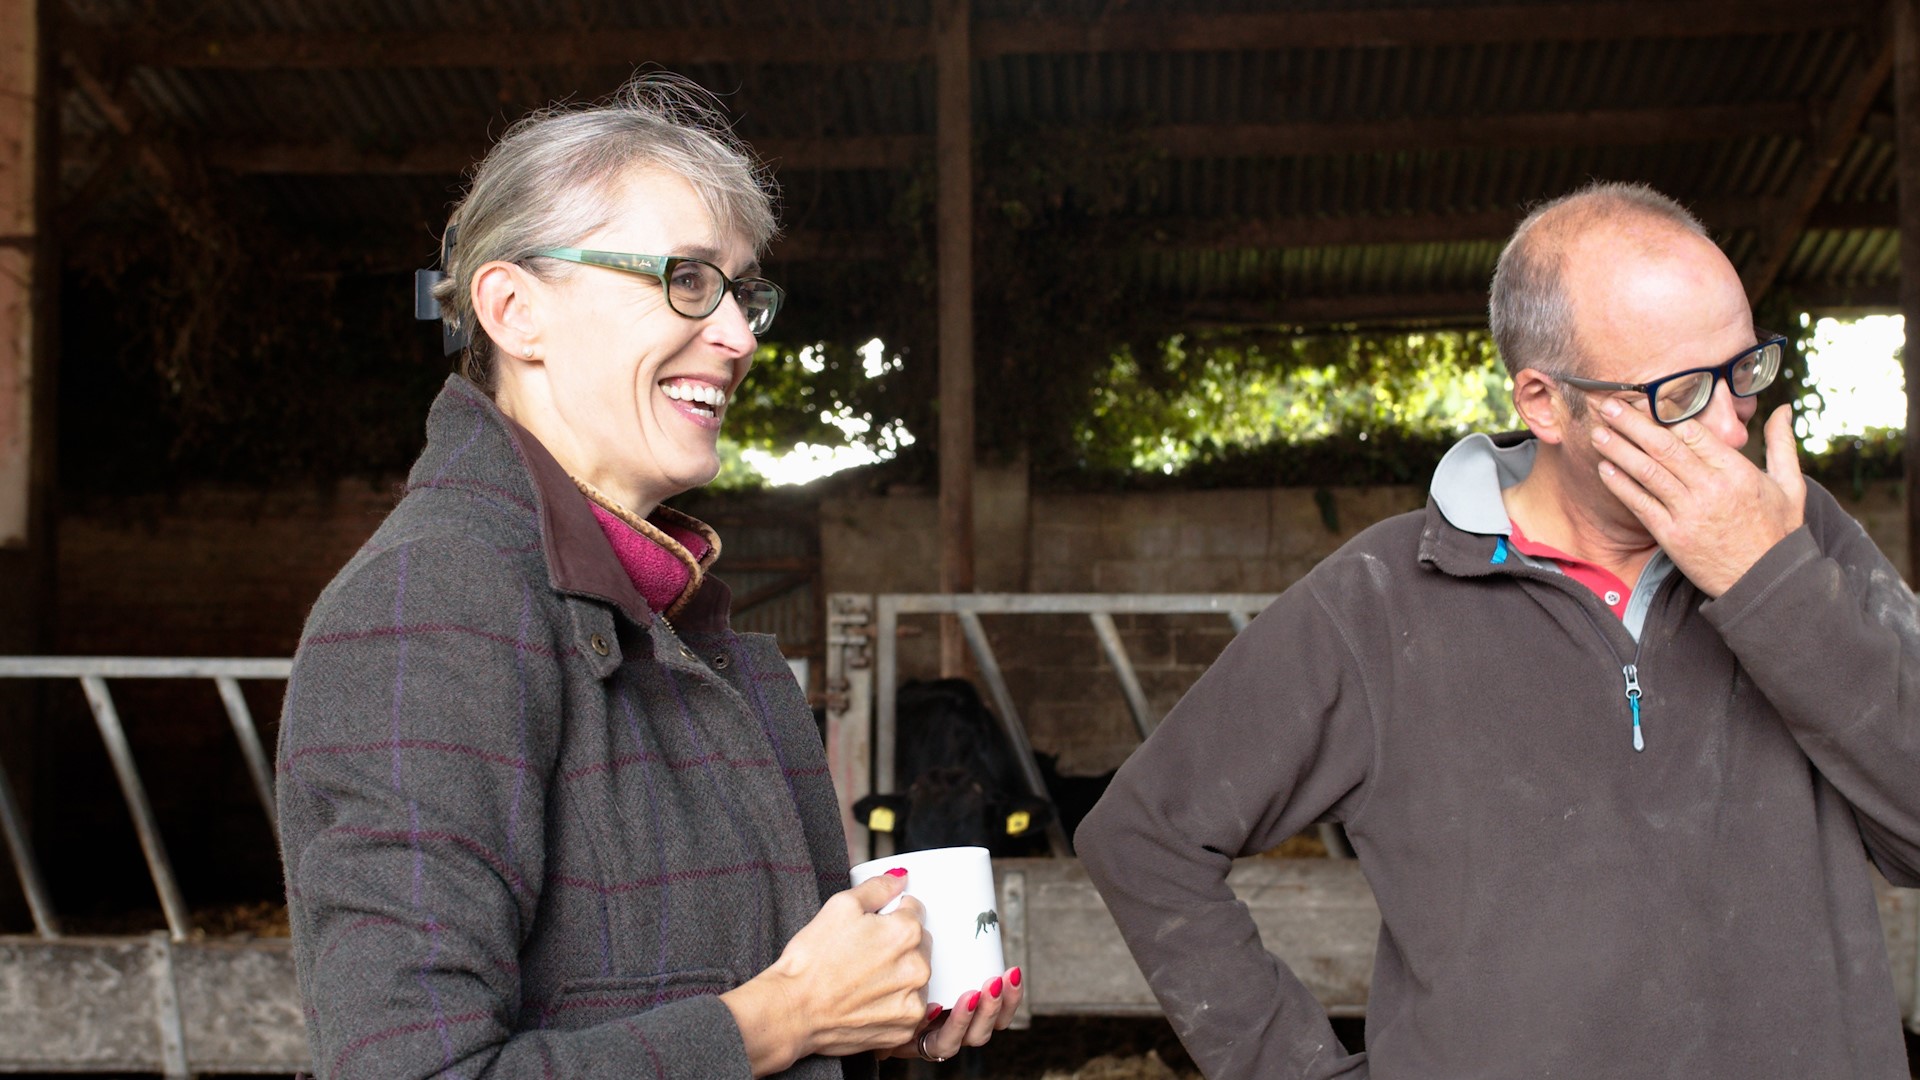 Woman stood in a barn holding a mug wearing glasses and jacket